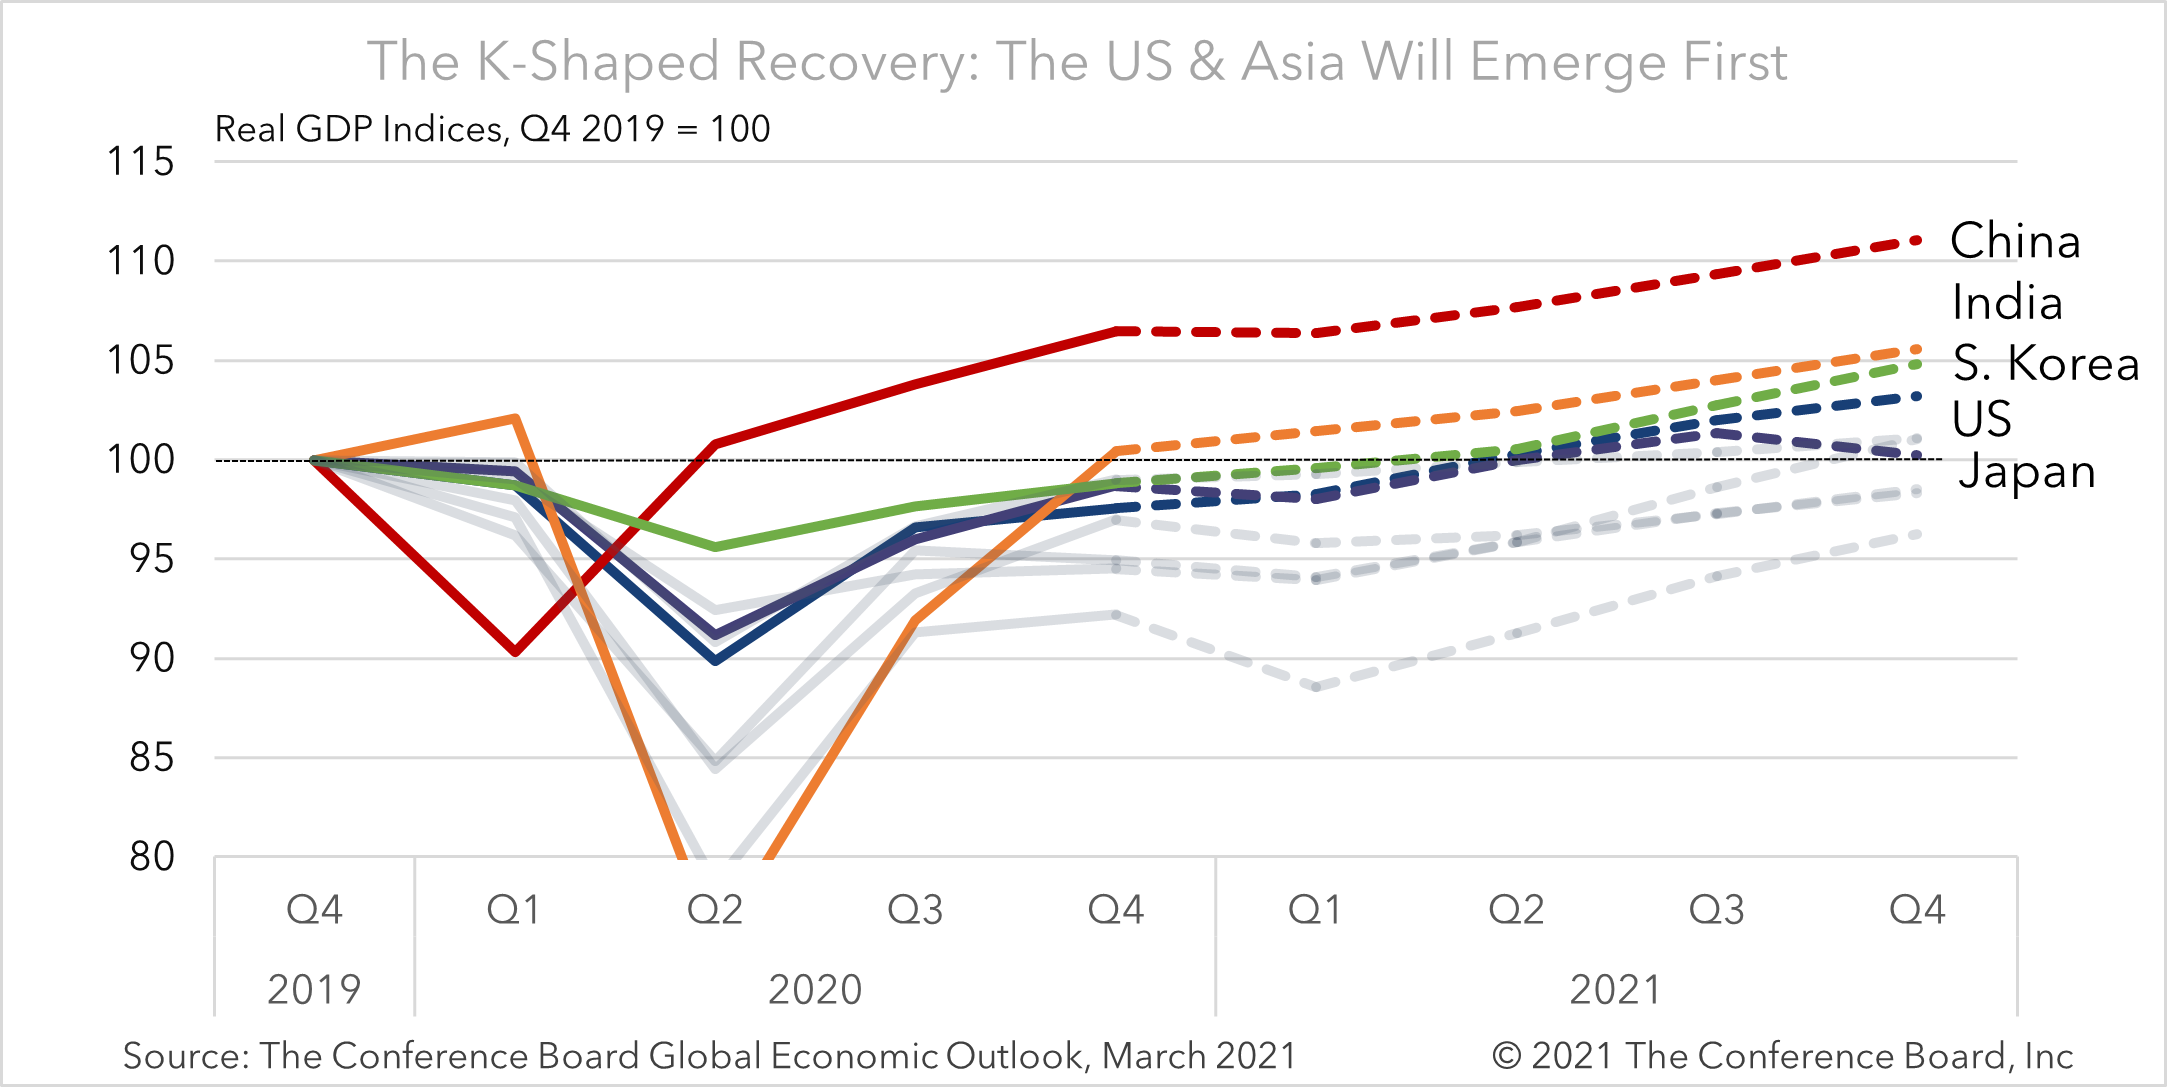 The K-shaped recovery: the US & Asia will emerge first